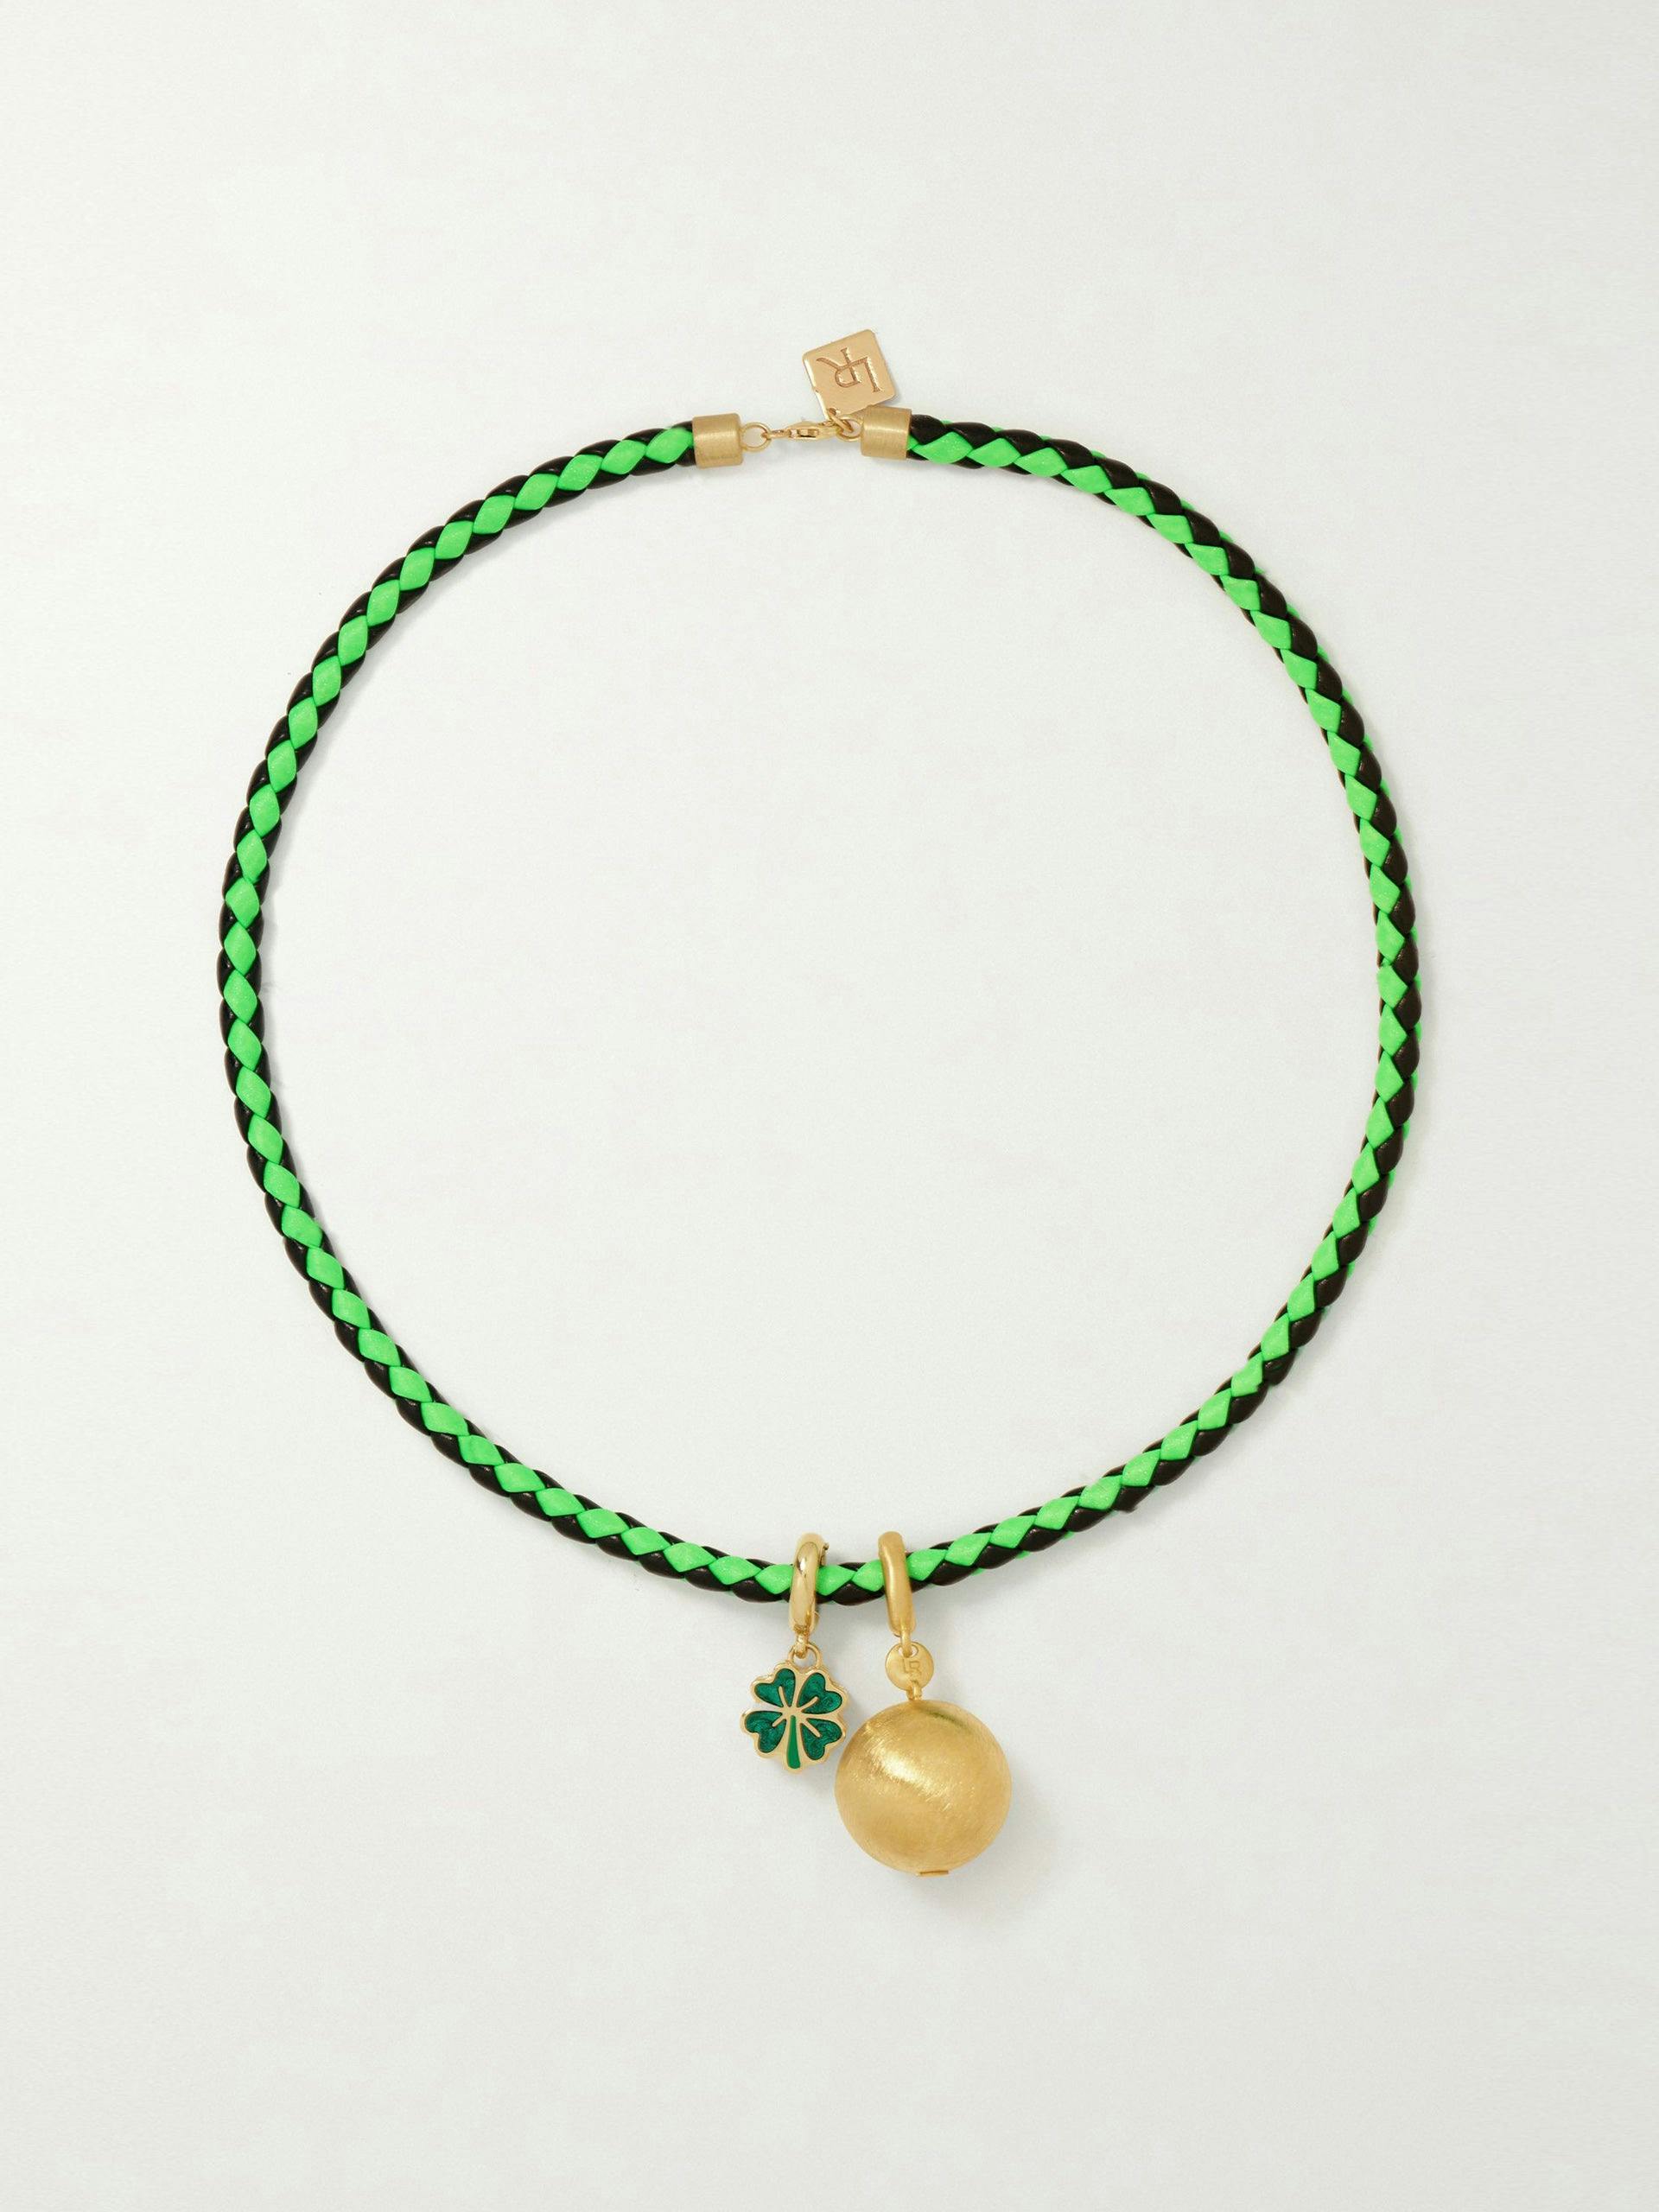 14kt gold, enamel and leather necklace